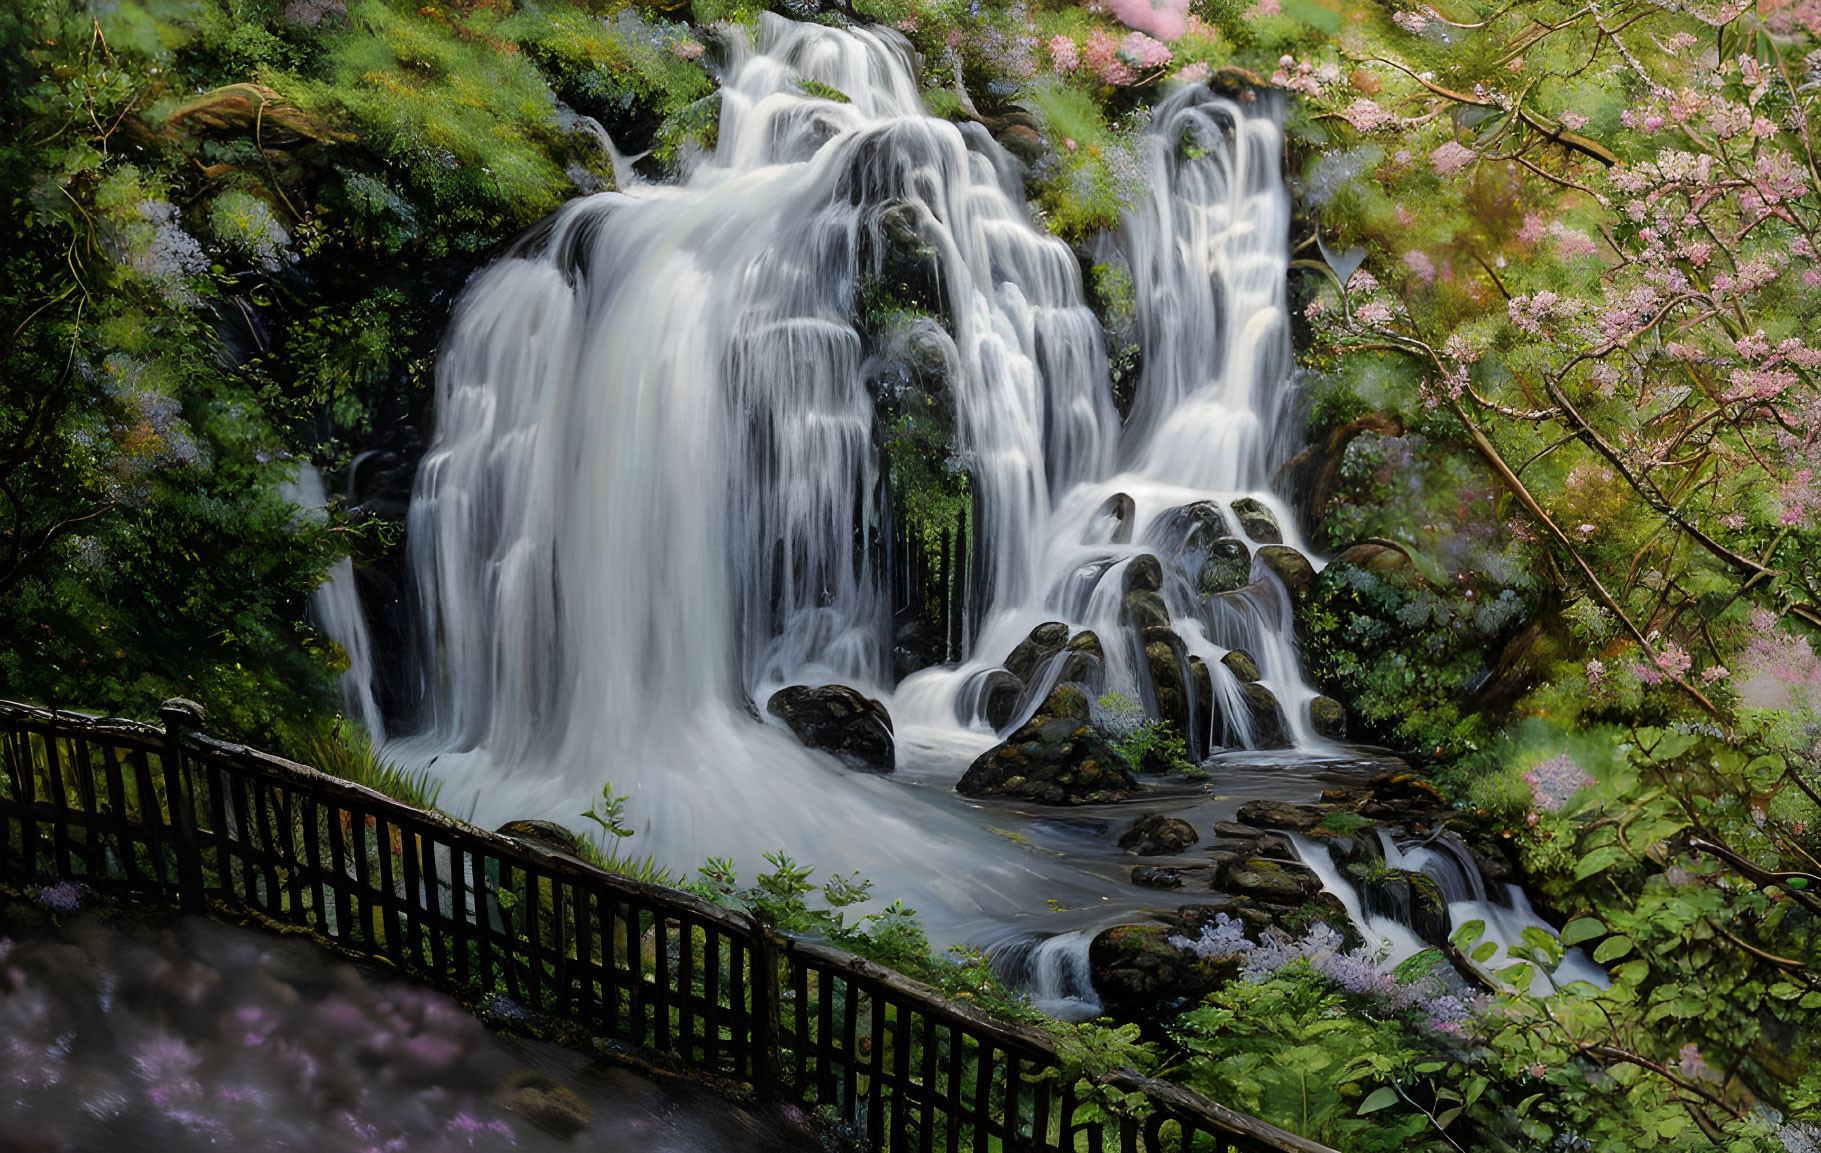 Lush greenery and pink blossoms frame cascading waterfall